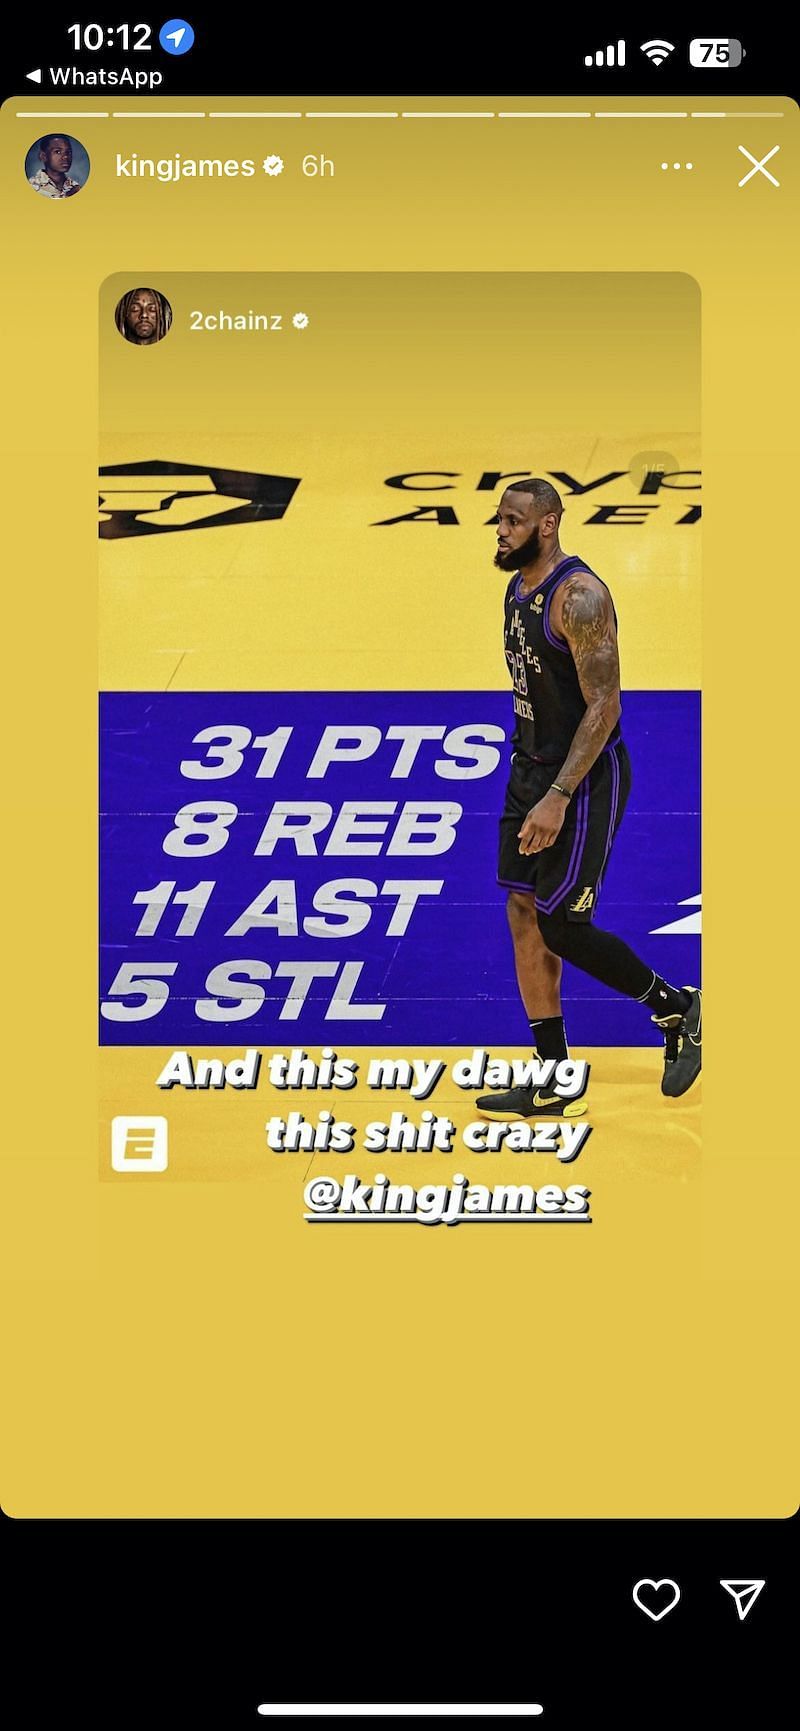 LeBron James IG story after the win.